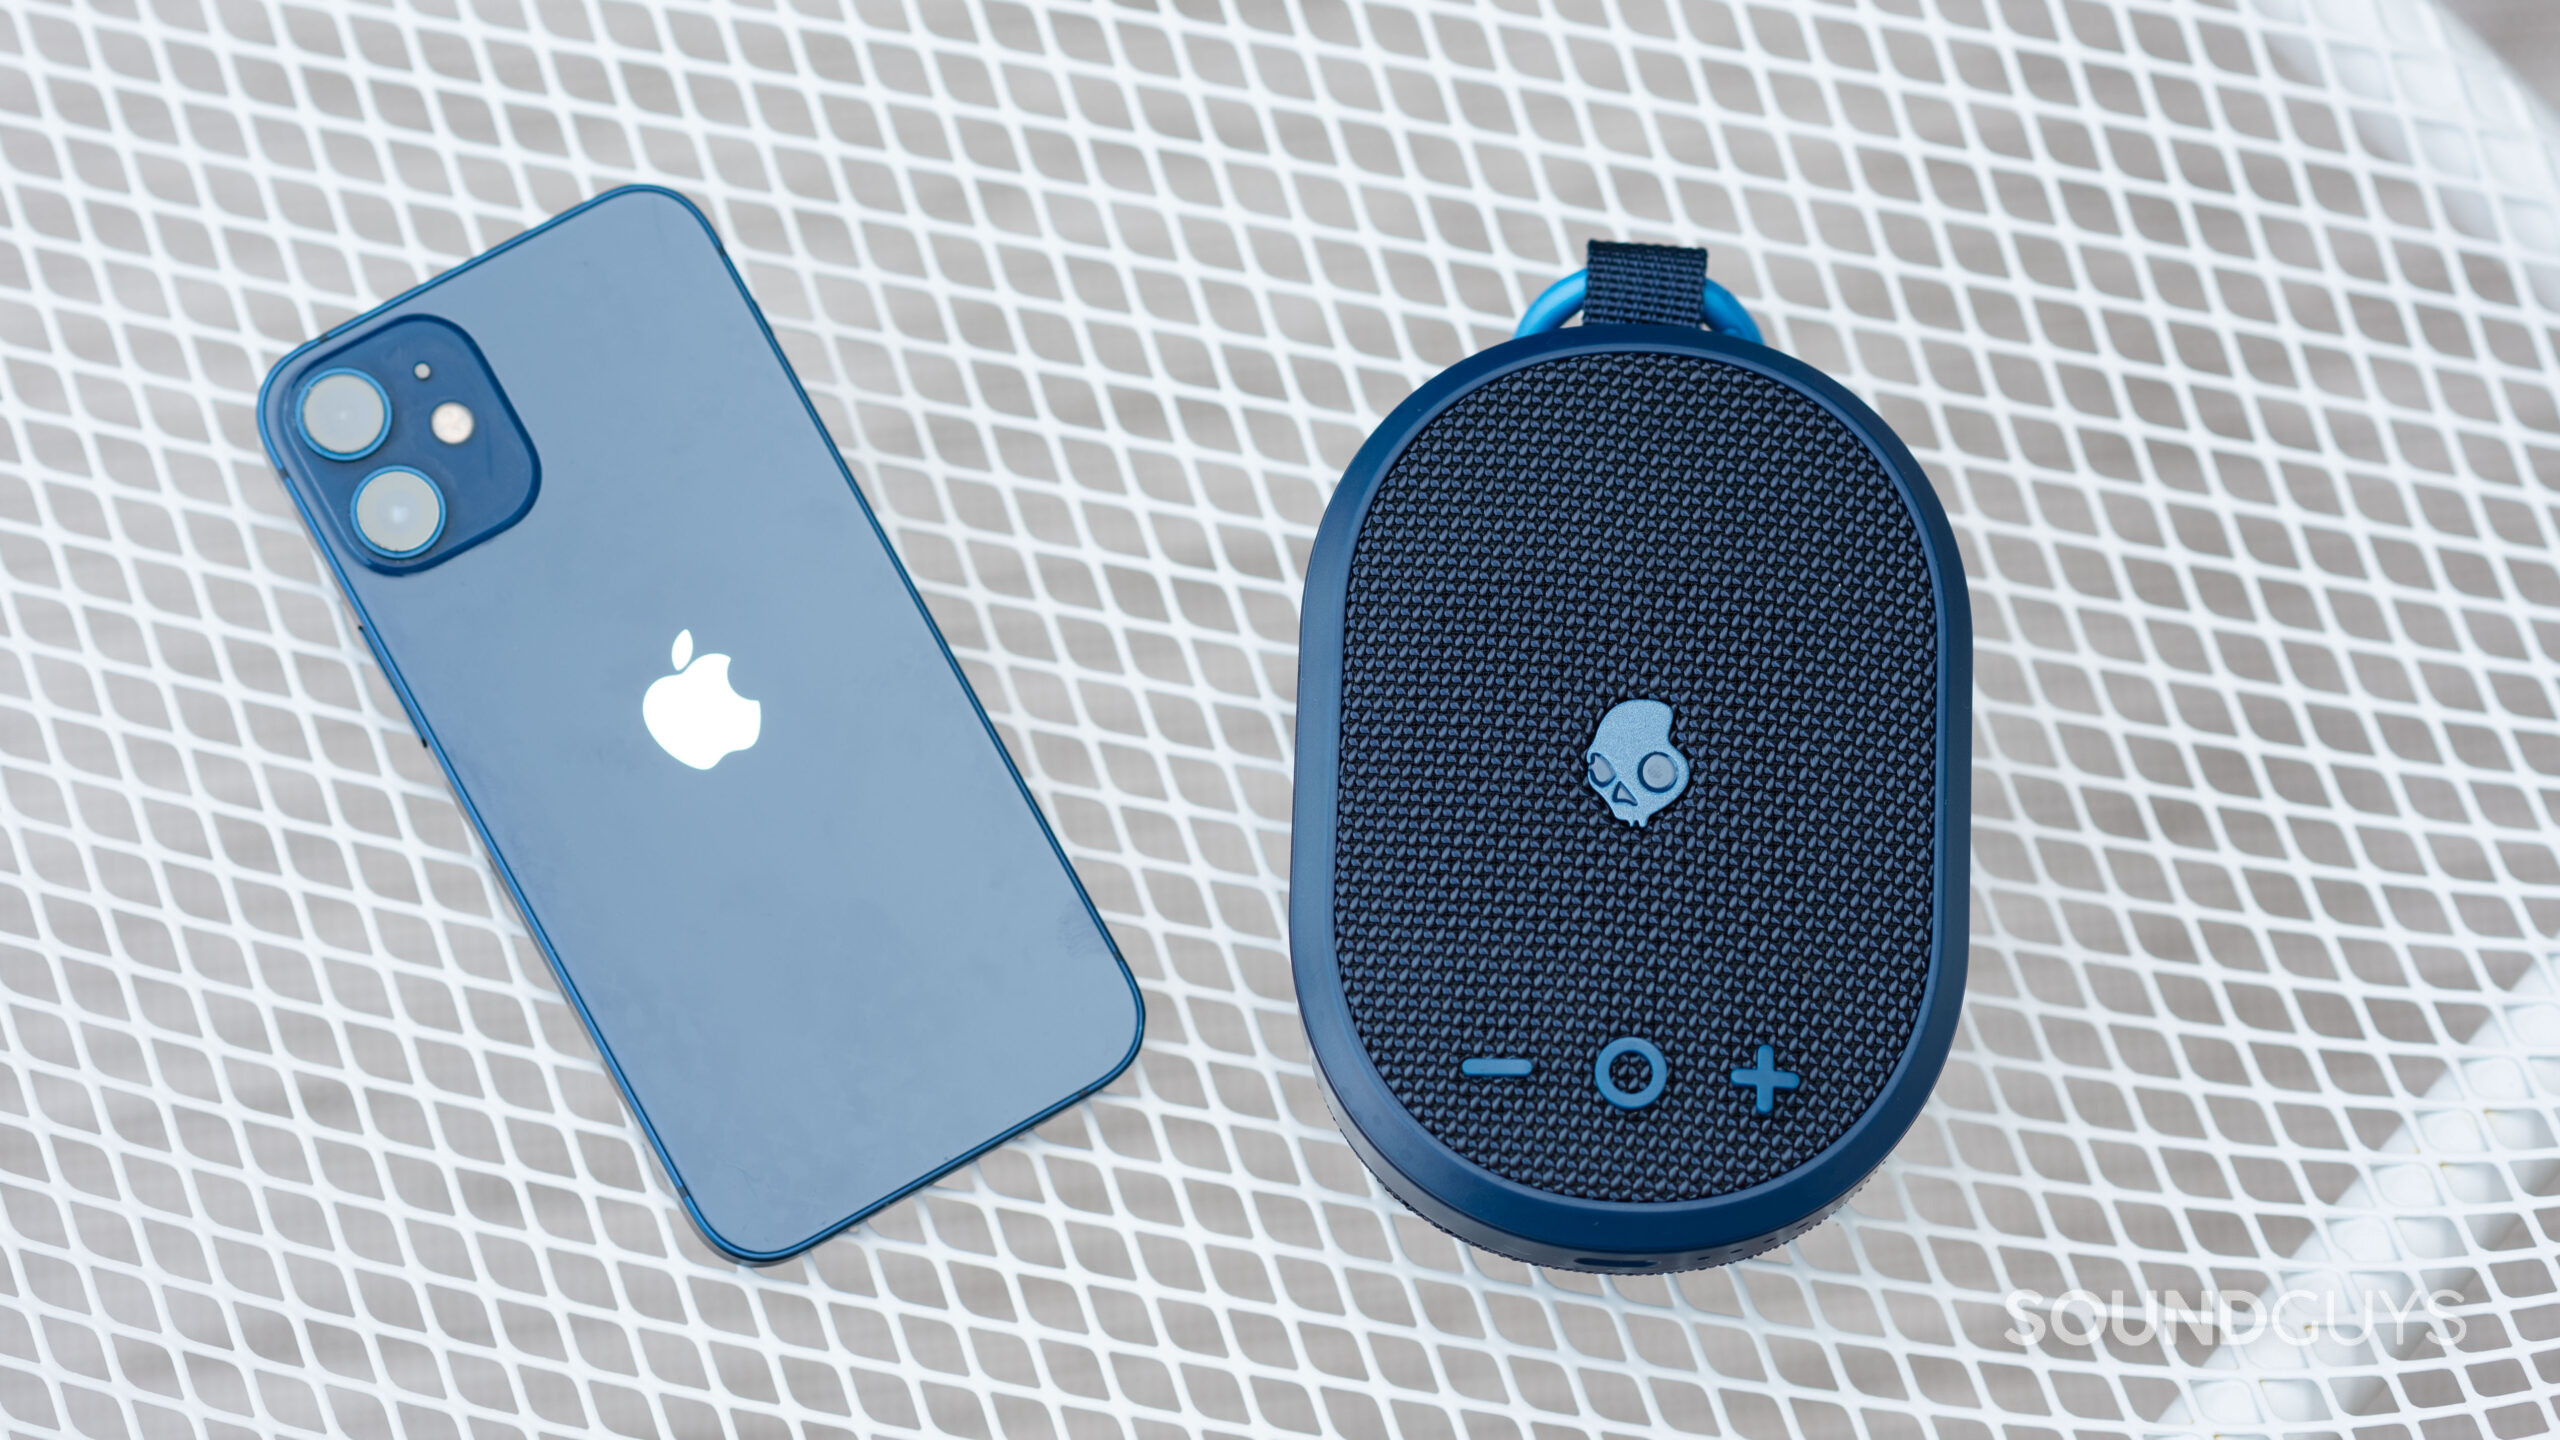 The Skullcandy Kilo next to an iPhone 12 mini; both products are in blue.